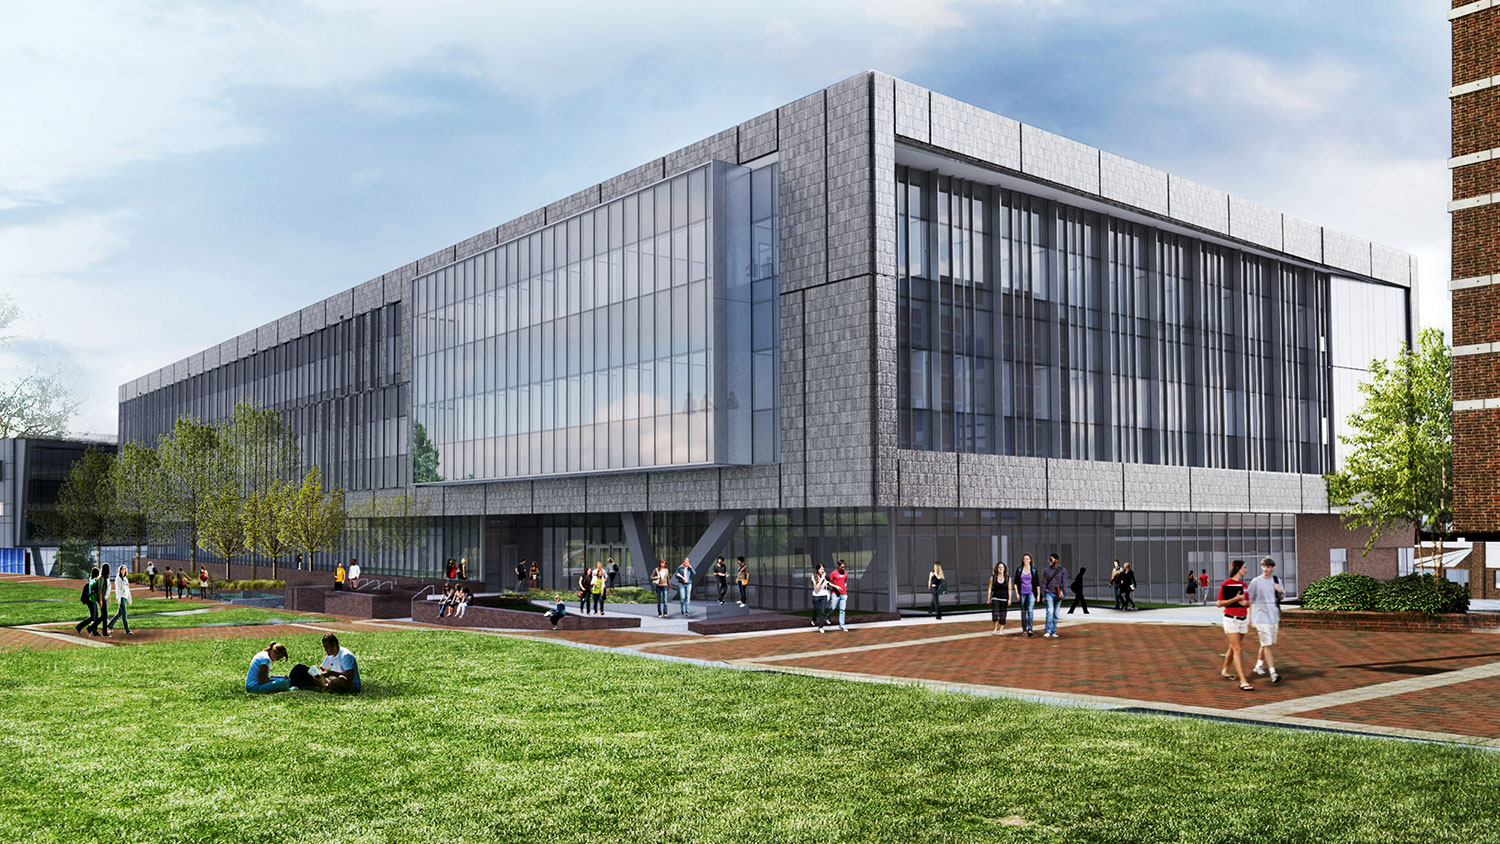 Rendering of the Engineering Building Oval - Oval entry